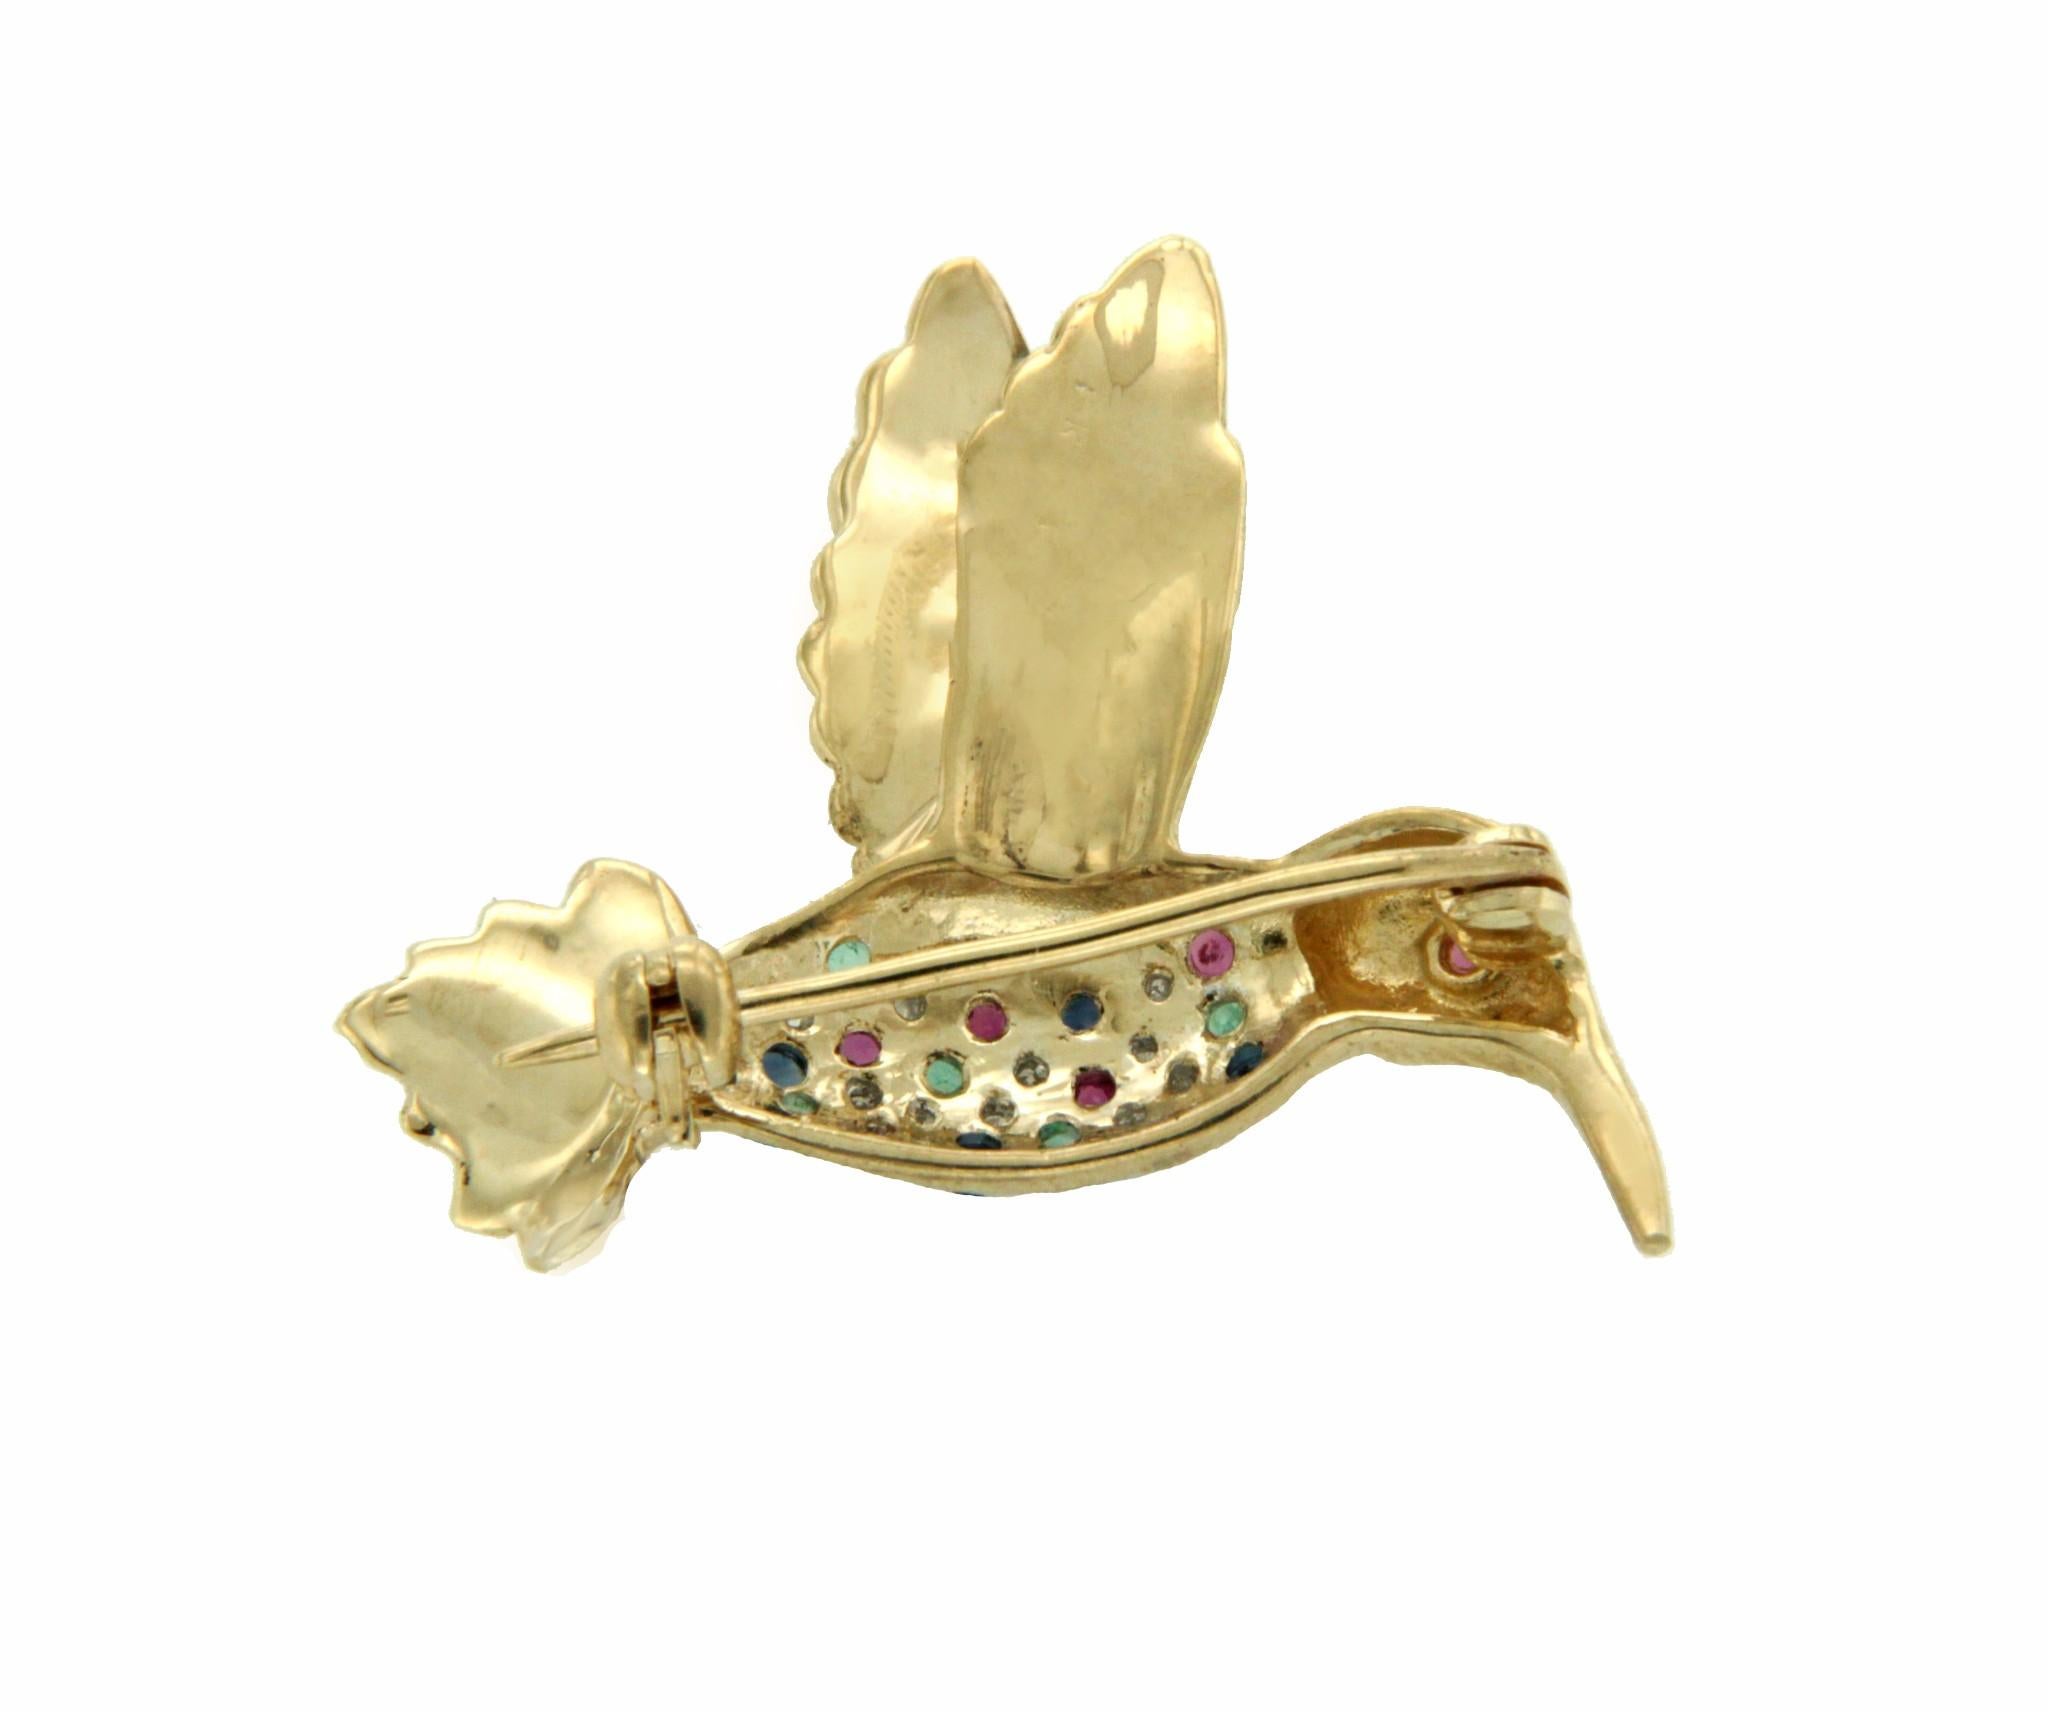 Type: Brooch
Height: 26 mm
Weight: 27 mm
Metal: Yellow Gold
Metal Purity: 14K
Hallmarks: 14K
Total Weight: 4.7 Grams
Condition: Pre-Owned
Stones Type: Diamonds And Gemstones